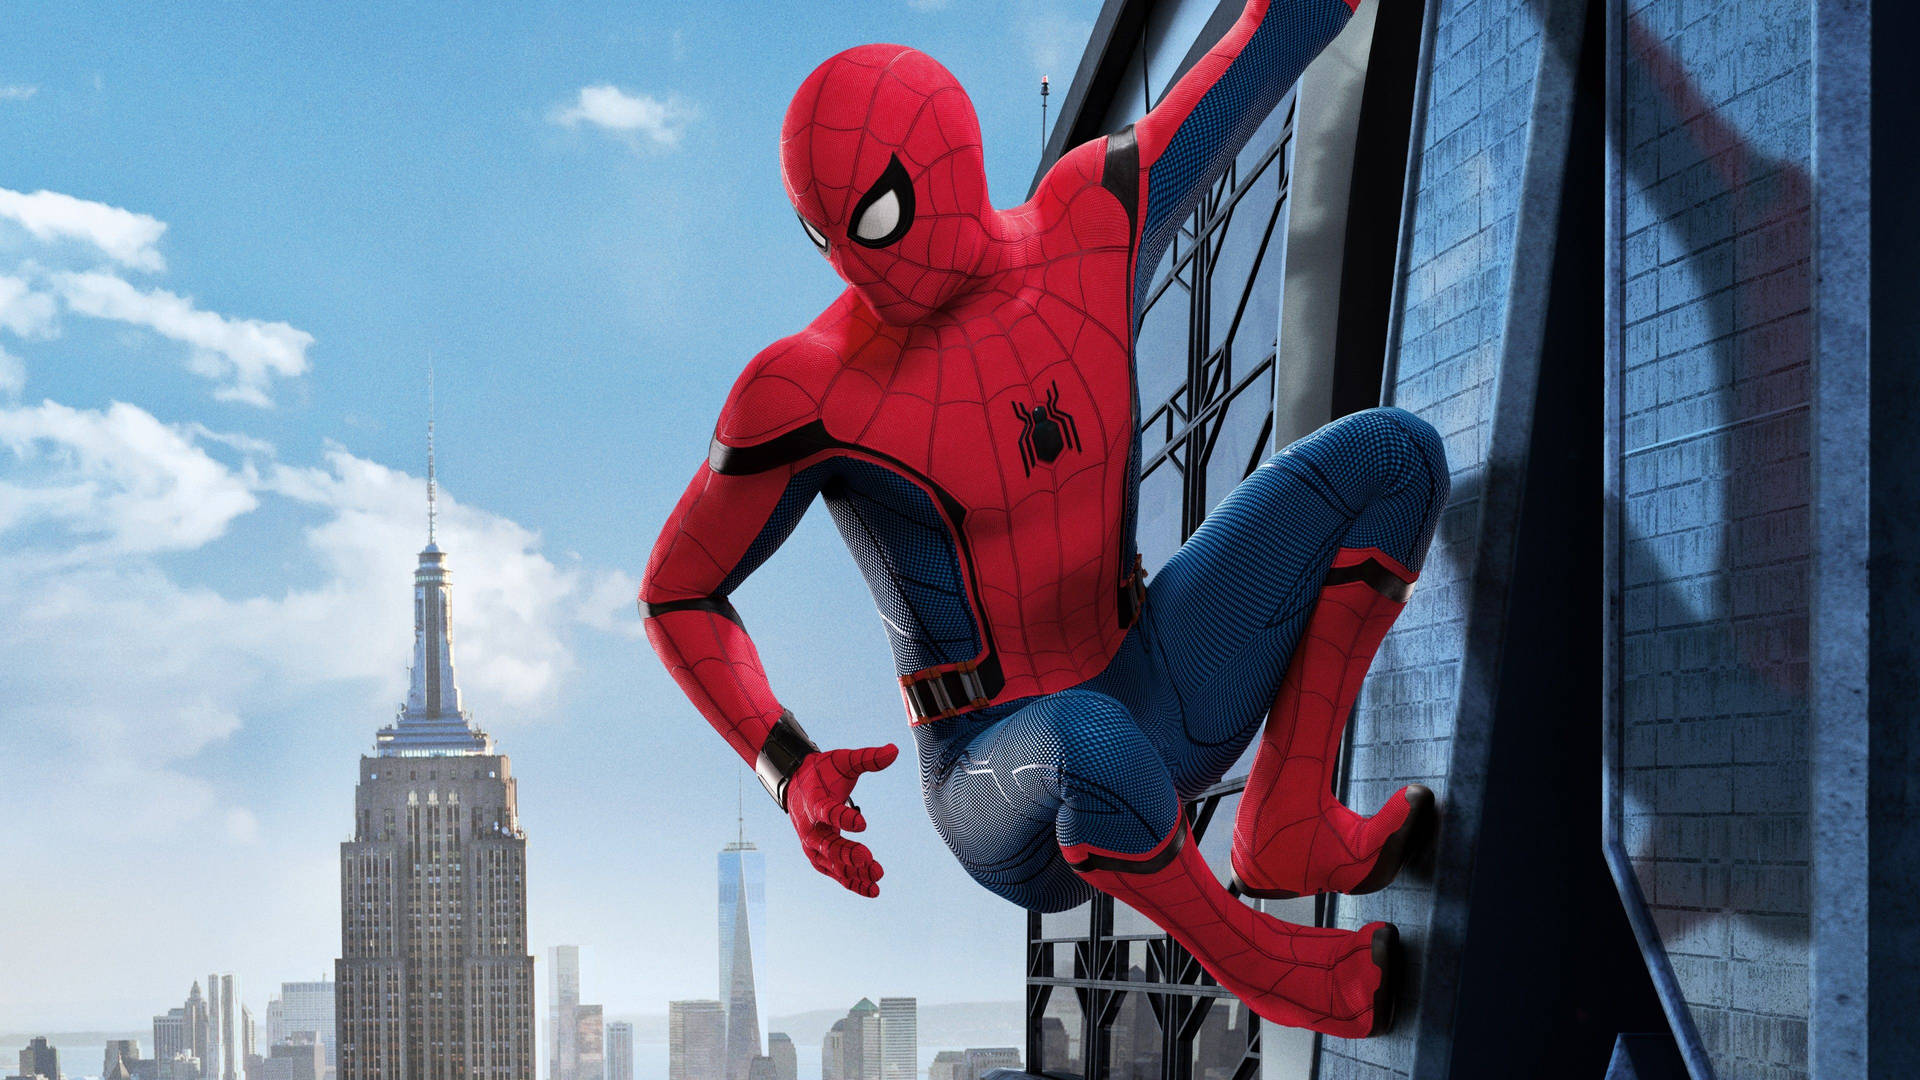 Free Spiderman Wallpaper Downloads, [500+] Spiderman Wallpapers for FREE |  